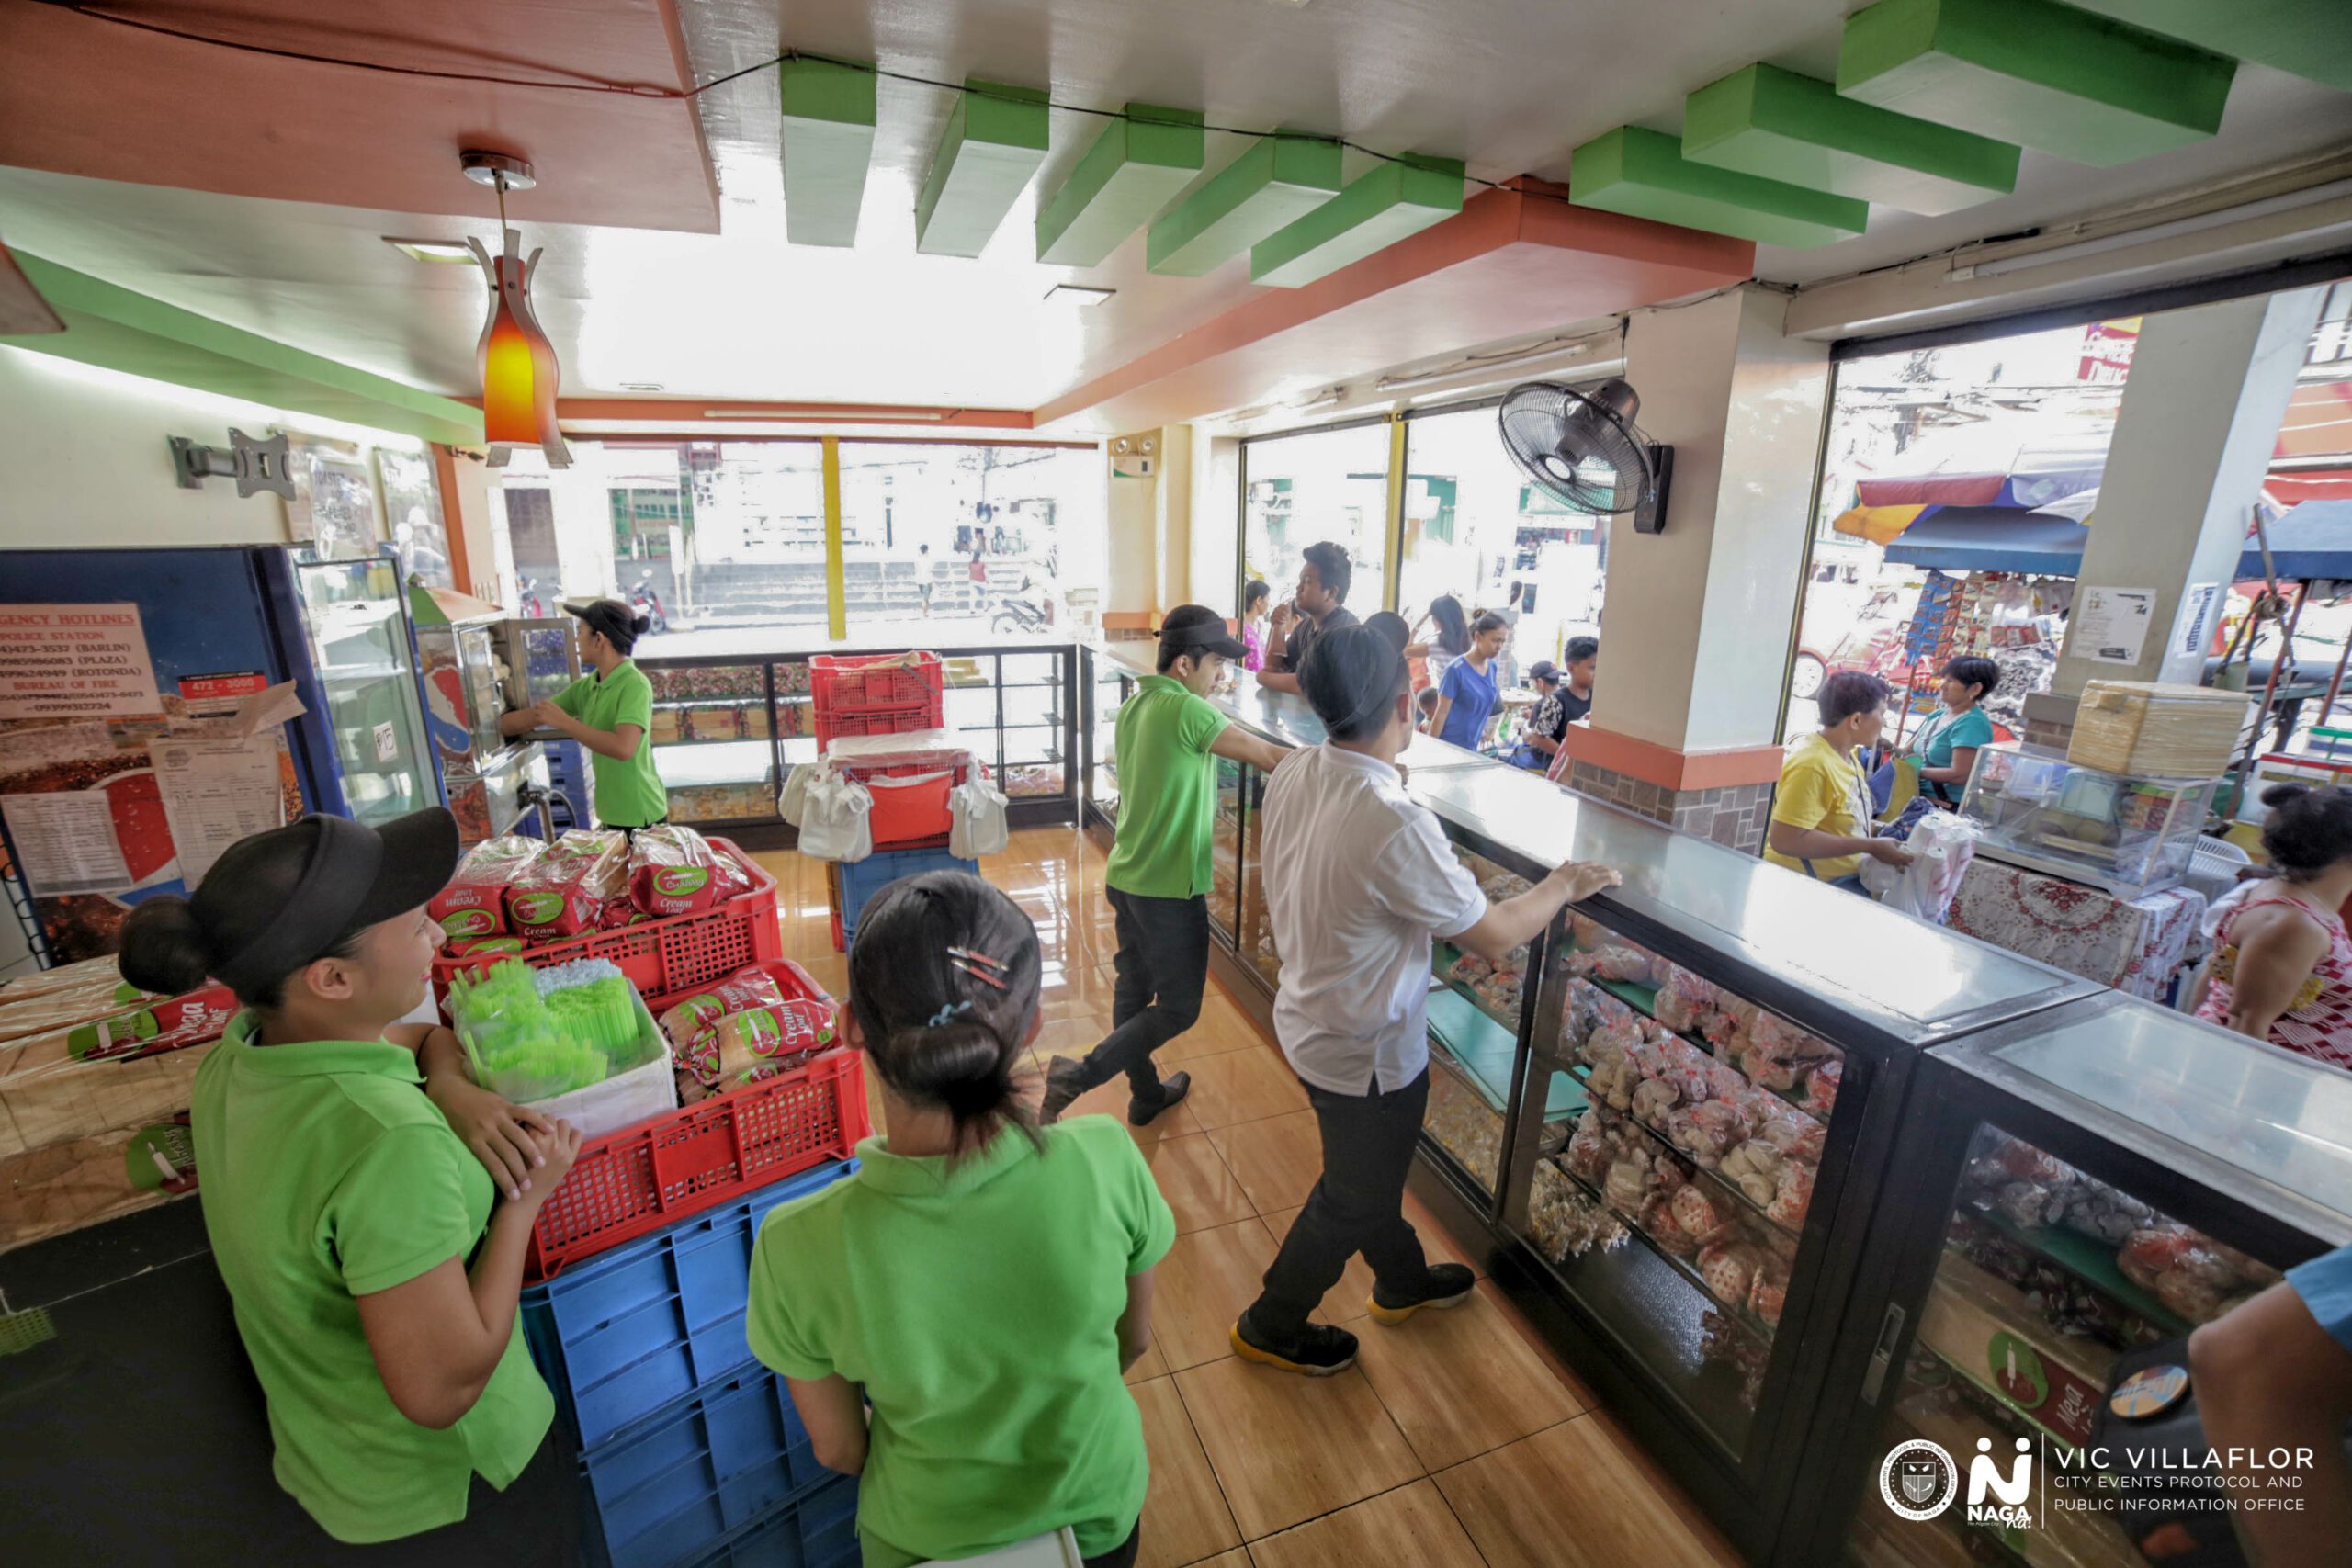 The Siopao Center's employees hard at work serving hungry patrons